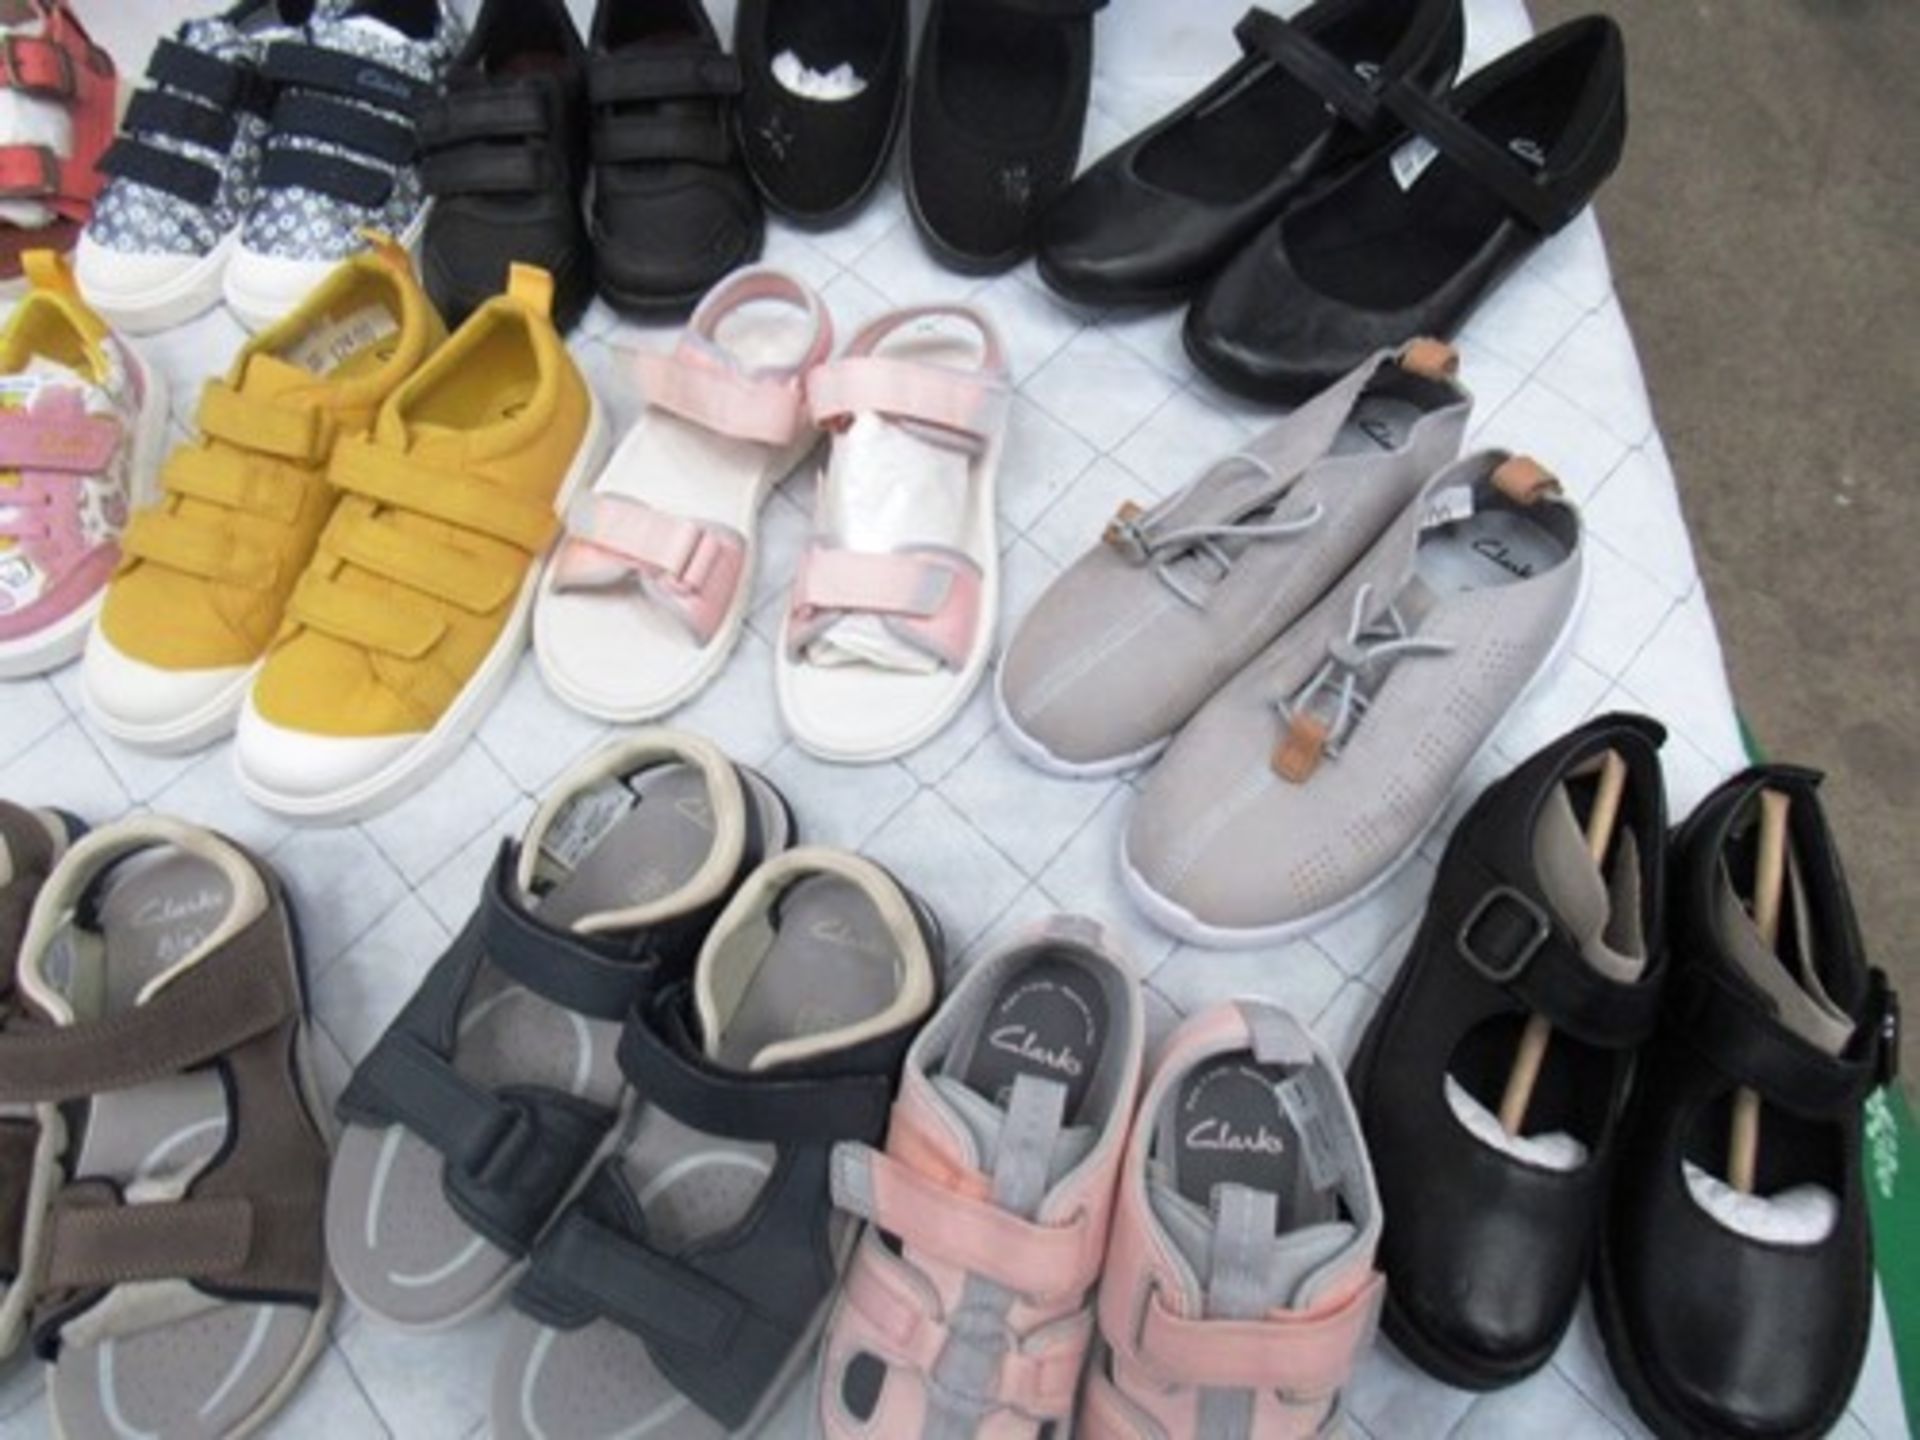 20 x pairs of children's Clark shoes and sandals in assorted styles and sizes - New (ES15) - Image 2 of 3